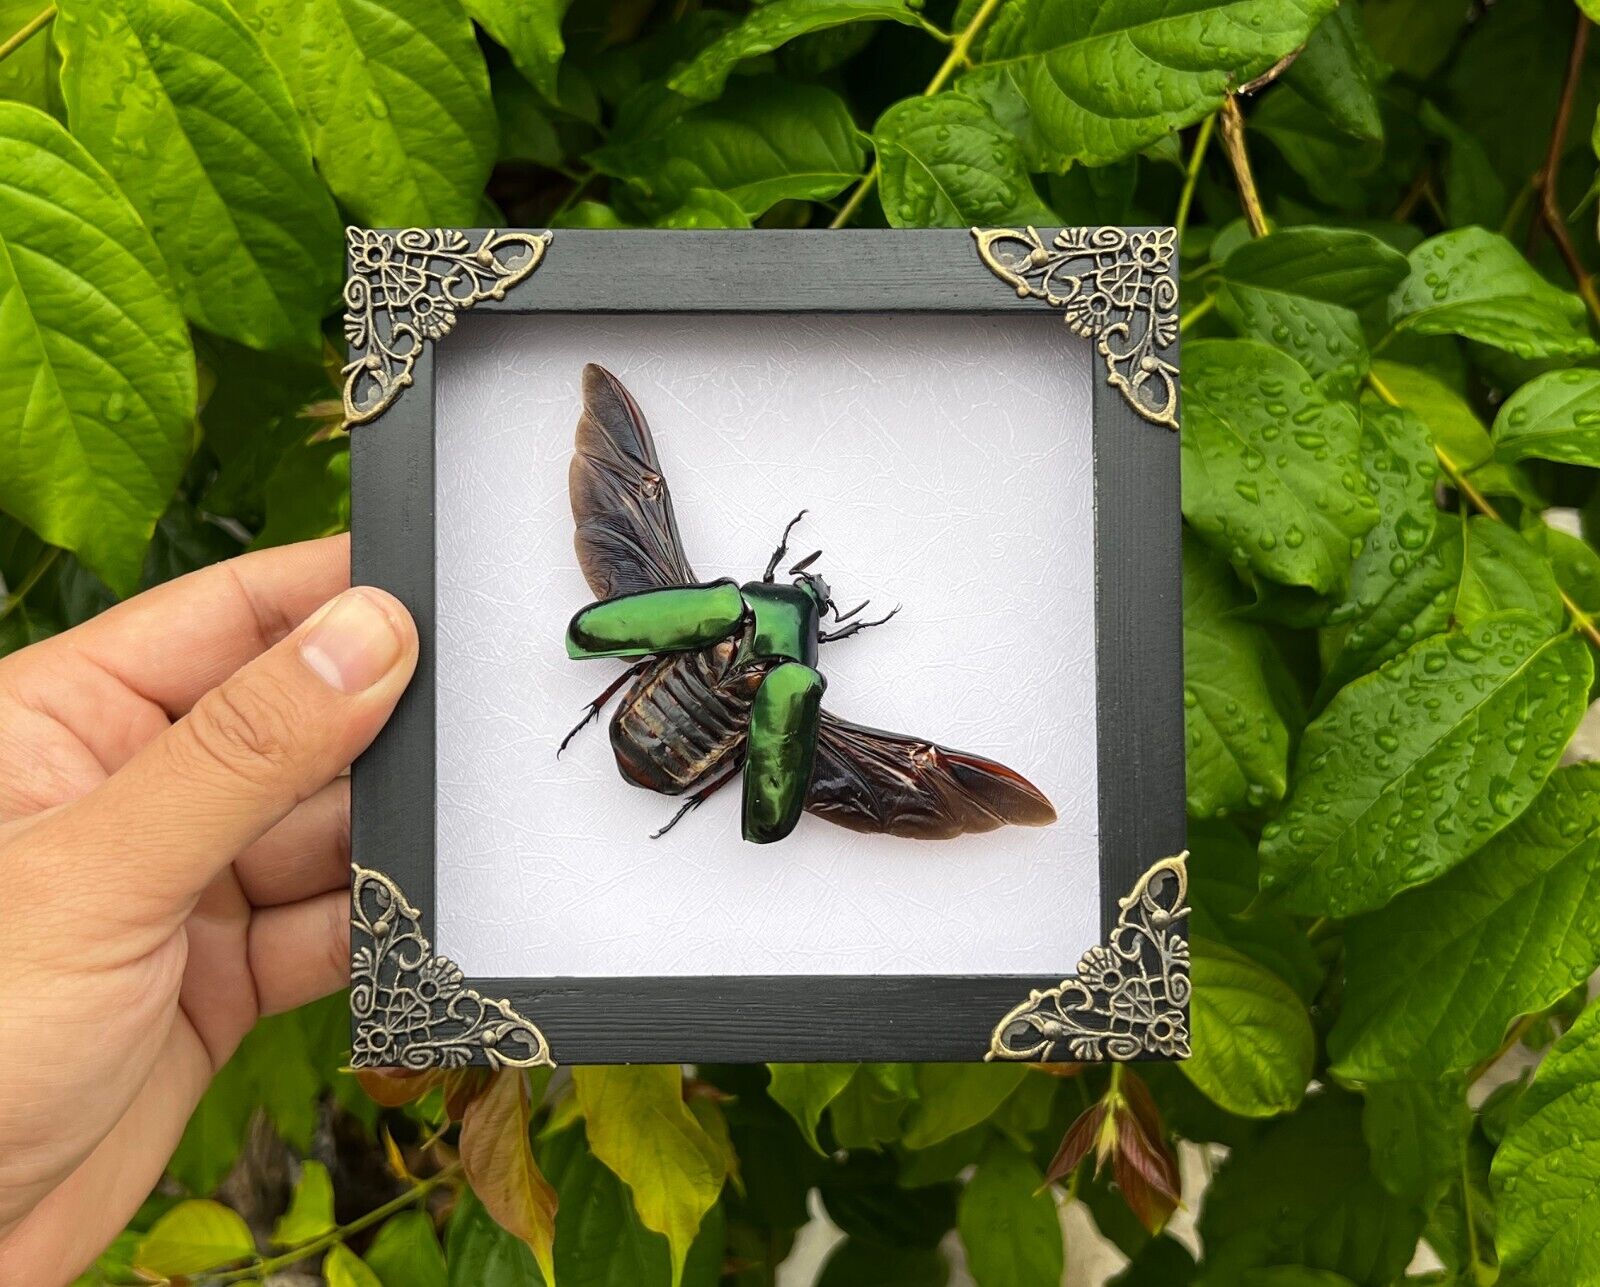 Framed Insect Beetle Taxidermy Collections Display Entomology Gift Wall Decor